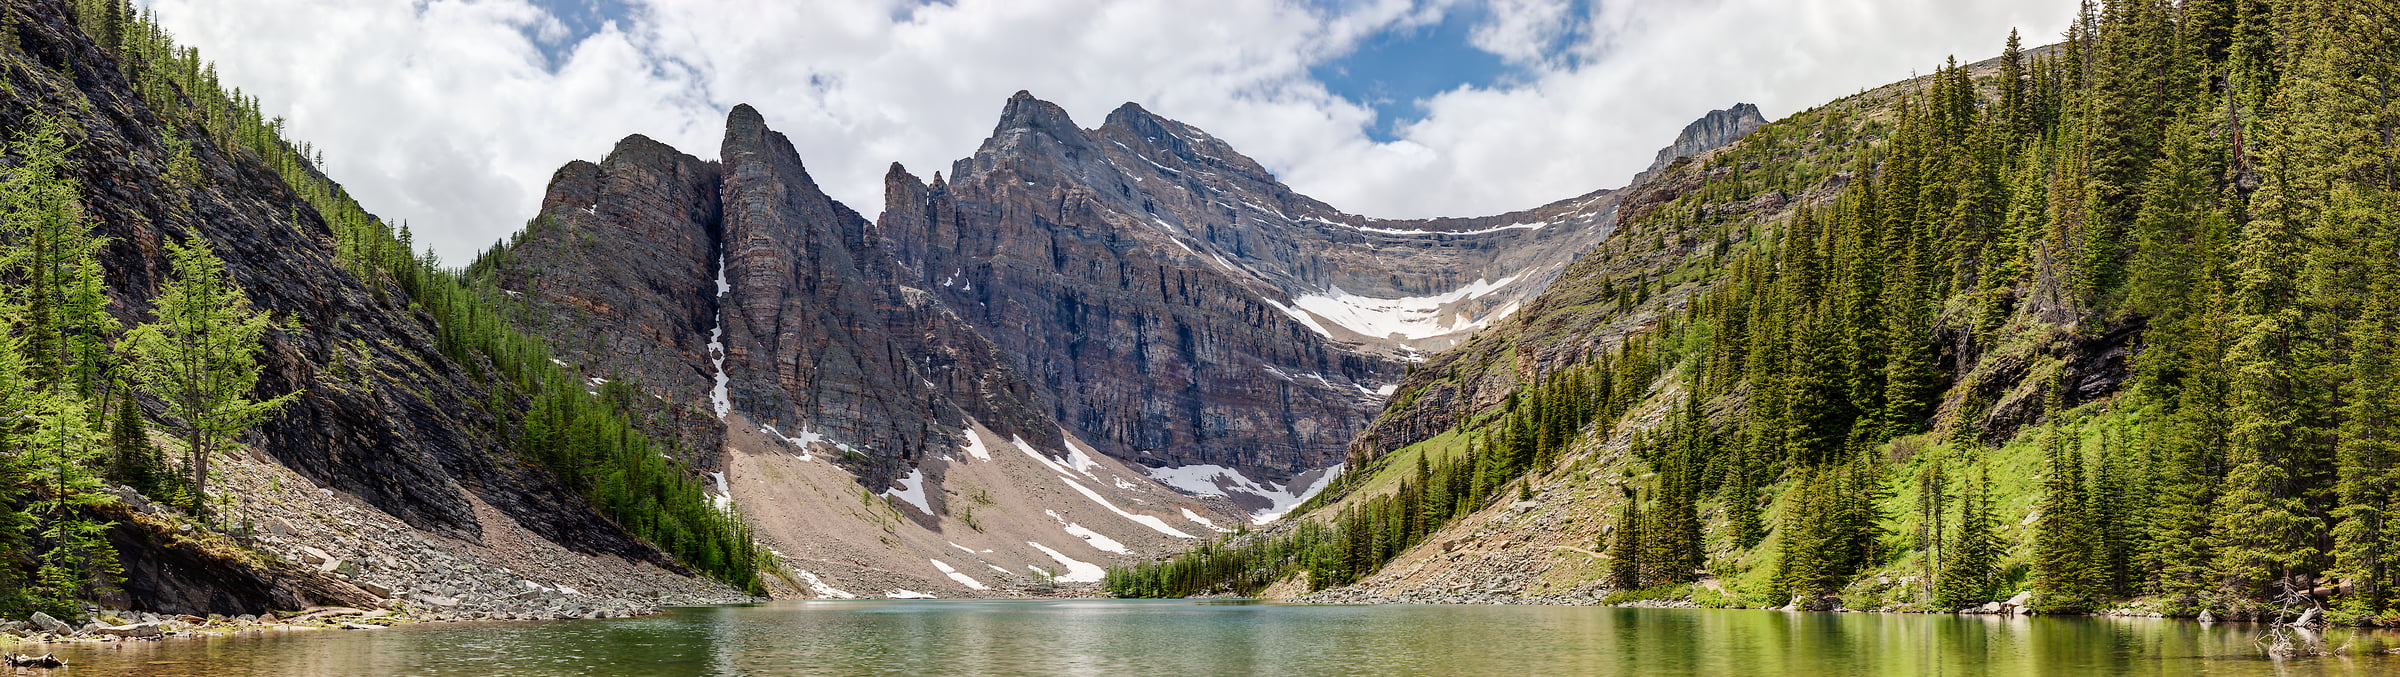 2,783 megapixels! A very high resolution, large-format VAST photo print of a mountain and a lake that would be good as a wallpaper; landscape photograph created by John Freeman in Lake Agnes, Banff National Park, Alberta, Canada